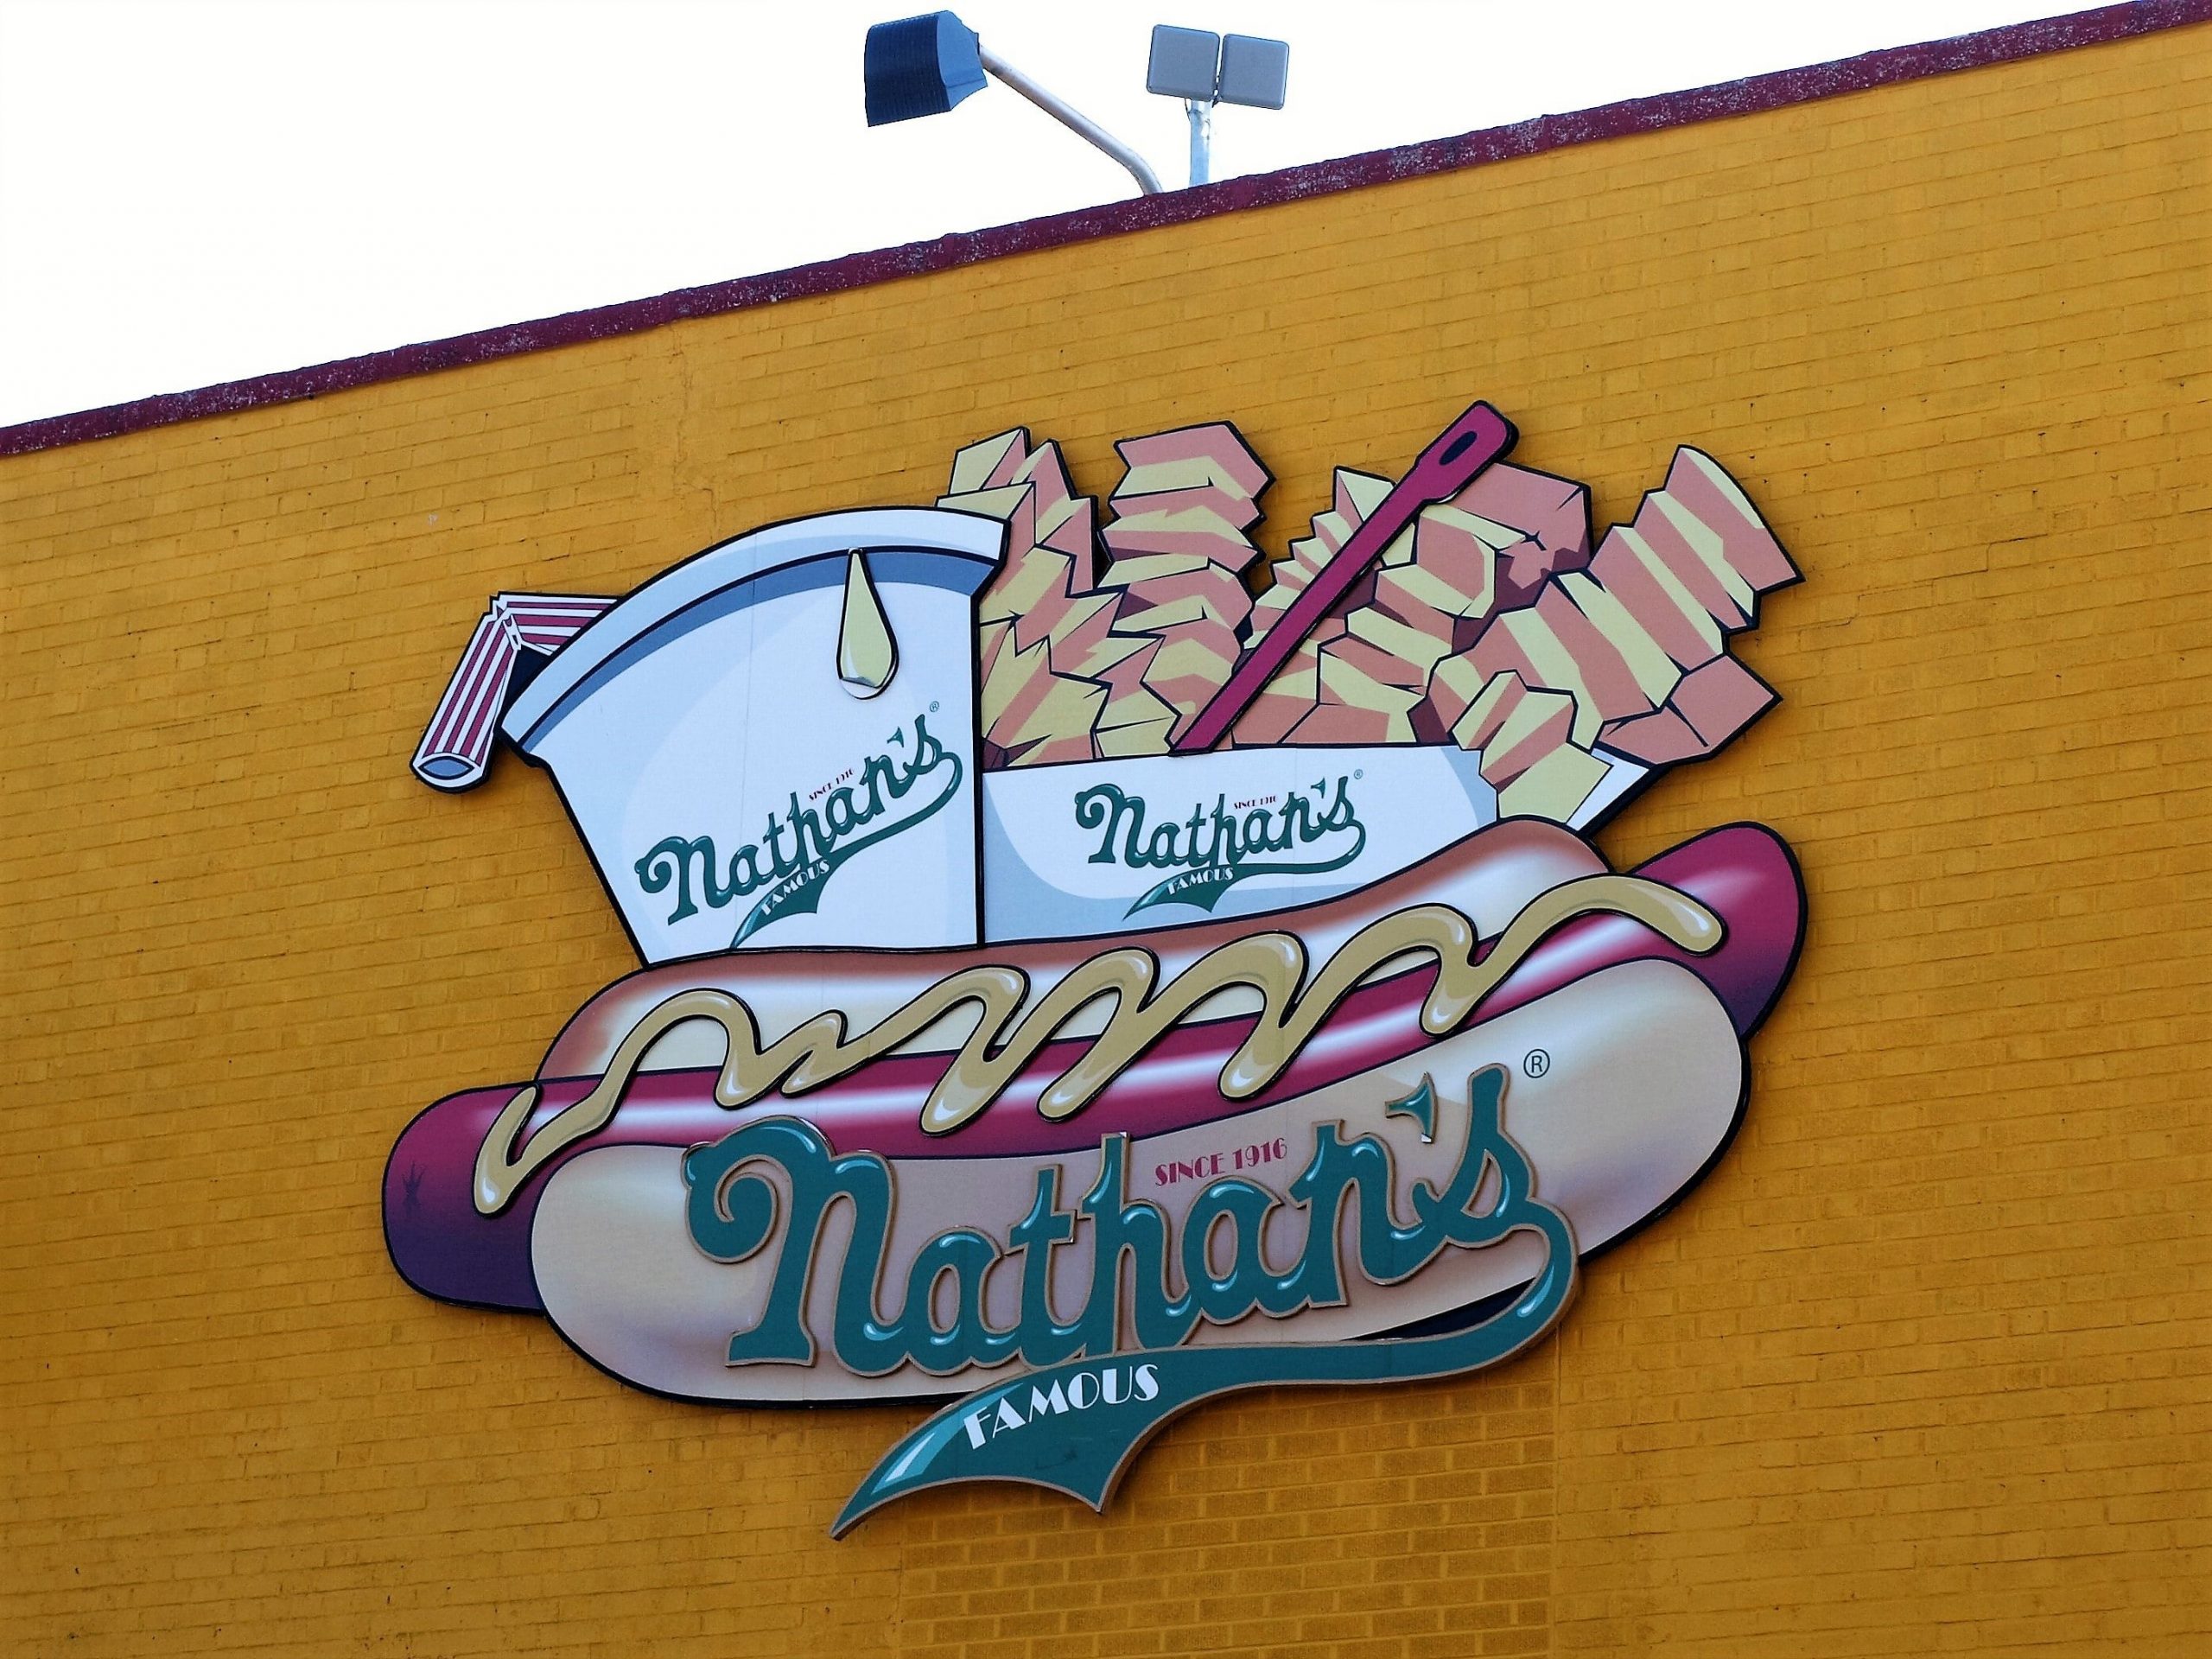 Nathan’s Famous Hot Dog Eating Contest: All you need to know